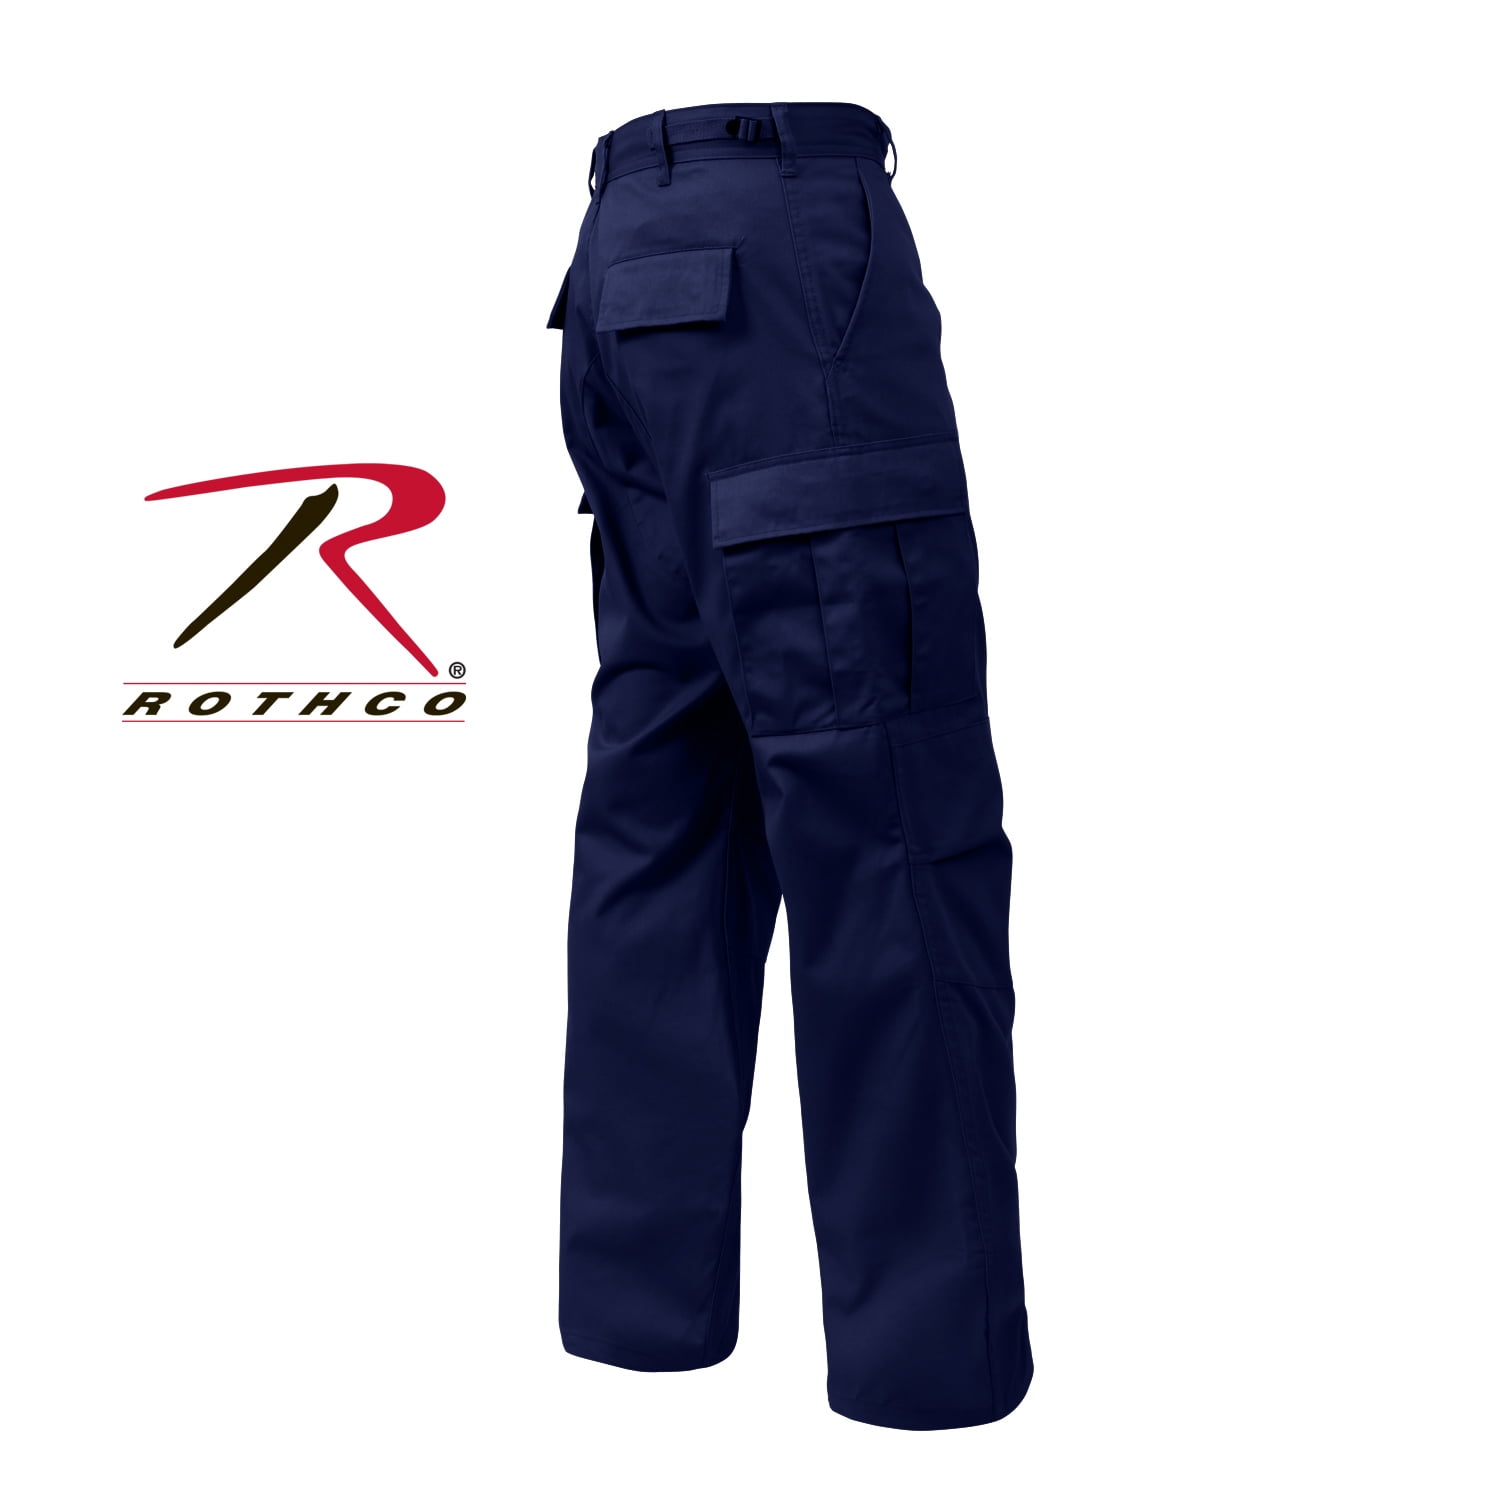 Rothco Relaxed Fit Zipper Fly BDU Pants,Midnight Navy Blue - Walmart.com